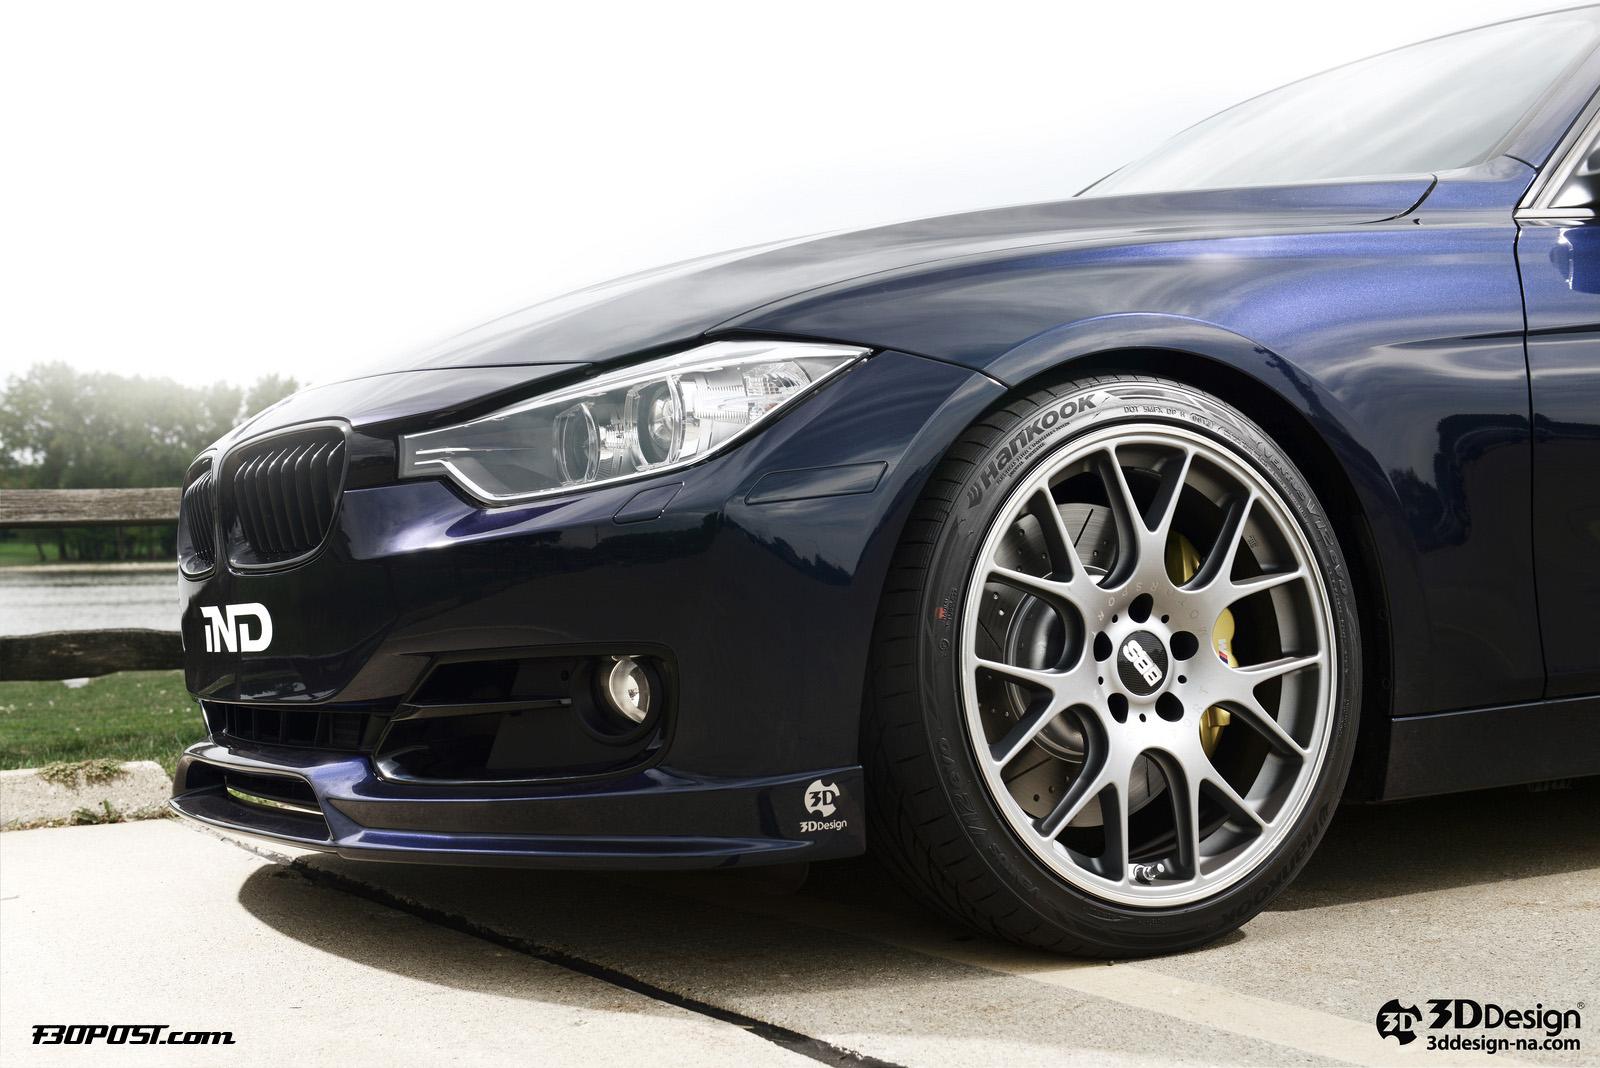 bmw-3-series-f30-tuned-by-3d-design-and-ind-photo-gallery_8.jpg